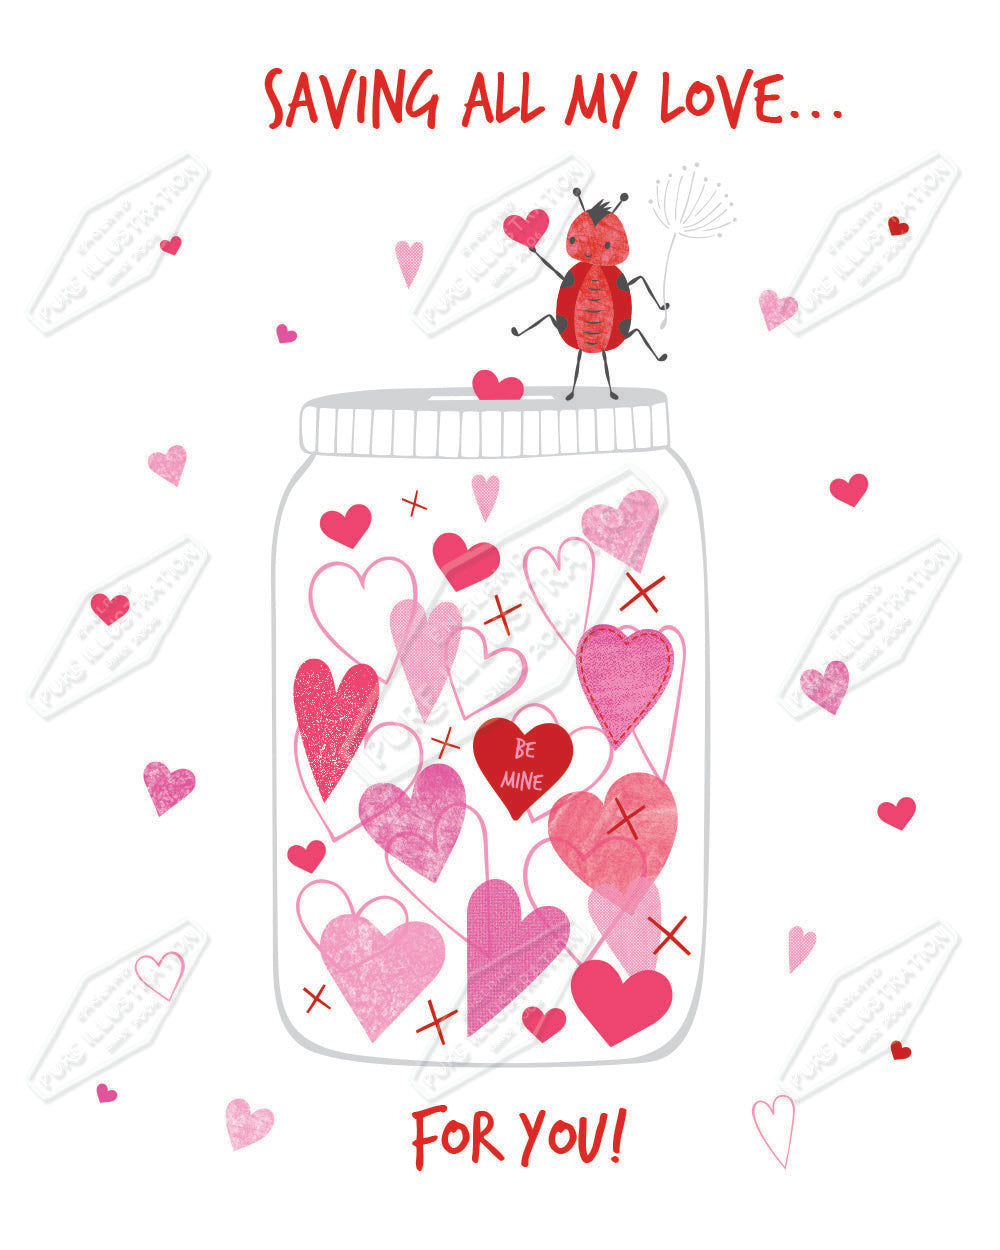 Valentines Design by Gill Eggleston for Pure Art Licensing Agency & Surface Design Studio